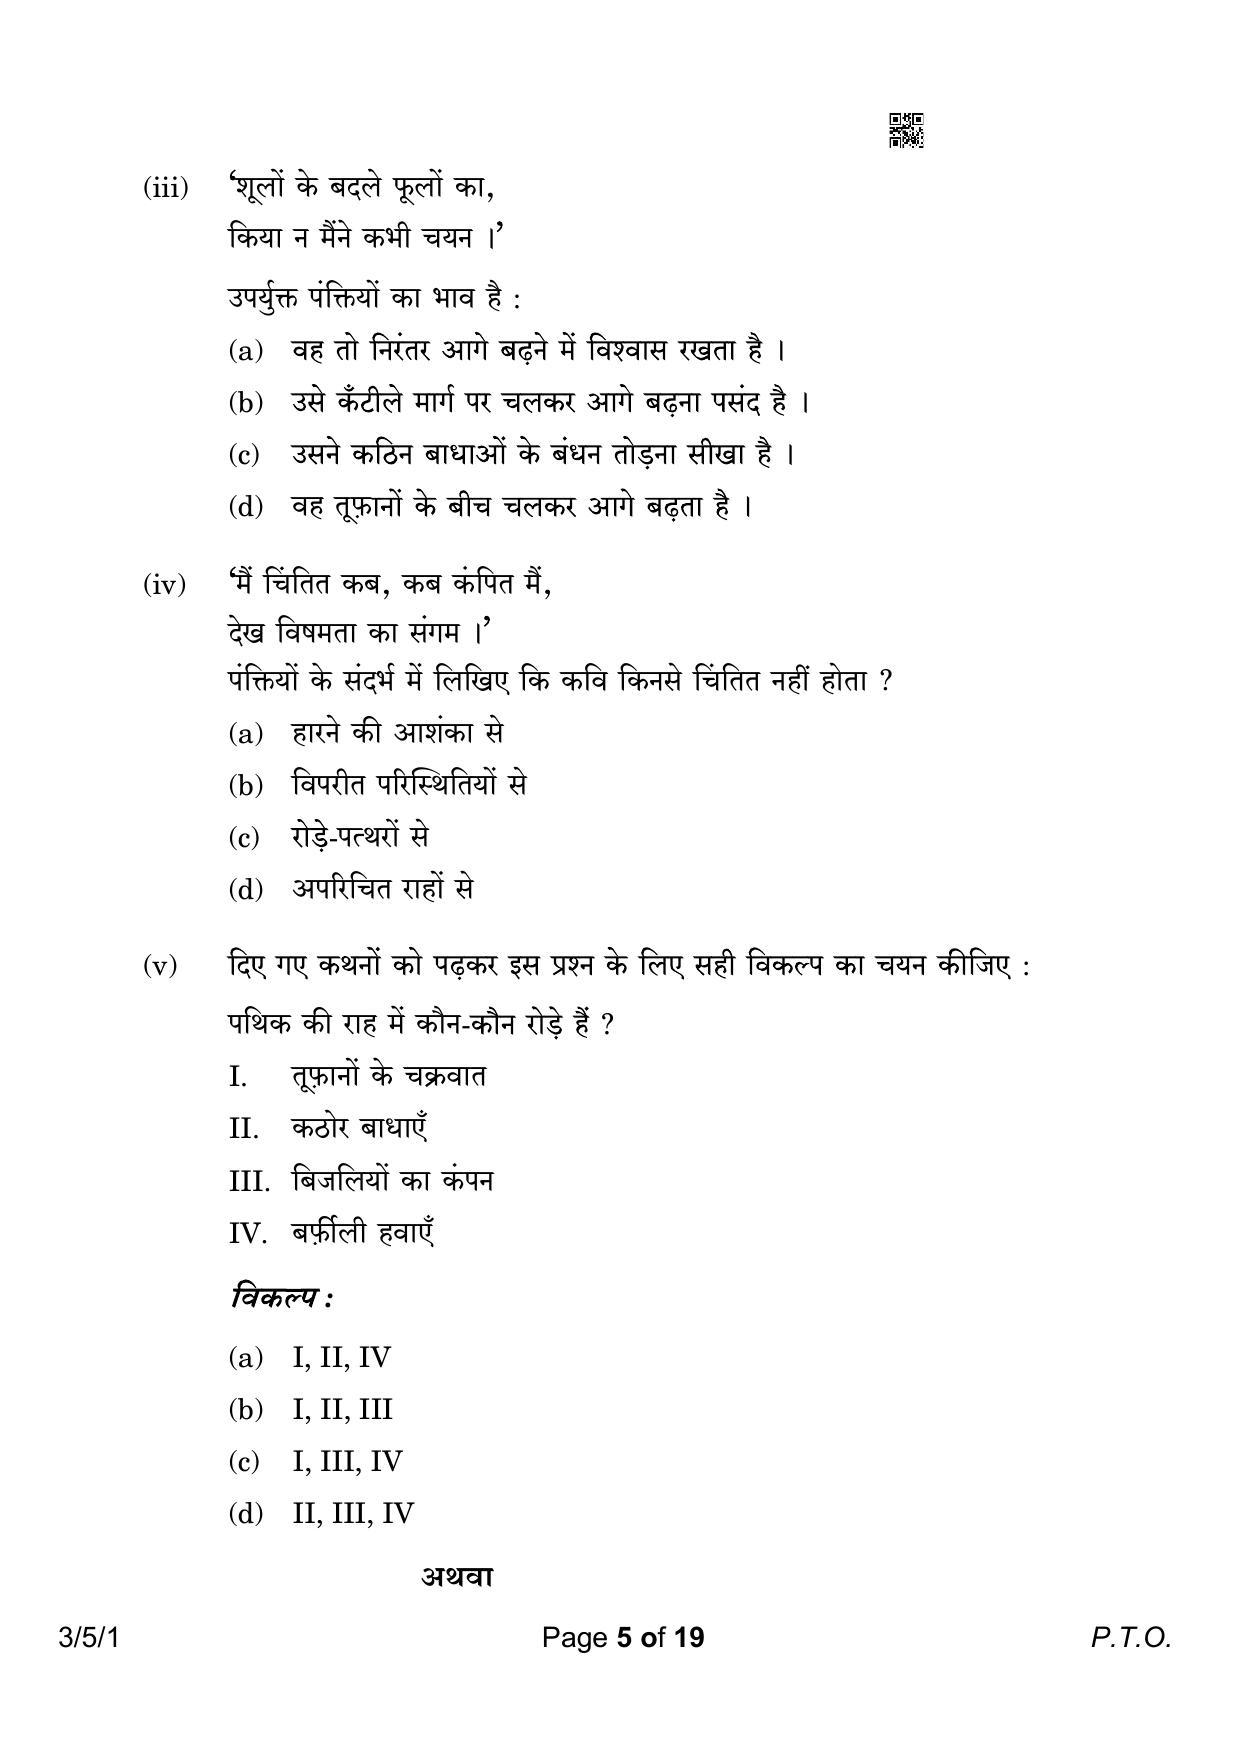 CBSE Class 10 3-5-1 Hindi A 2023 Question Paper - Page 5